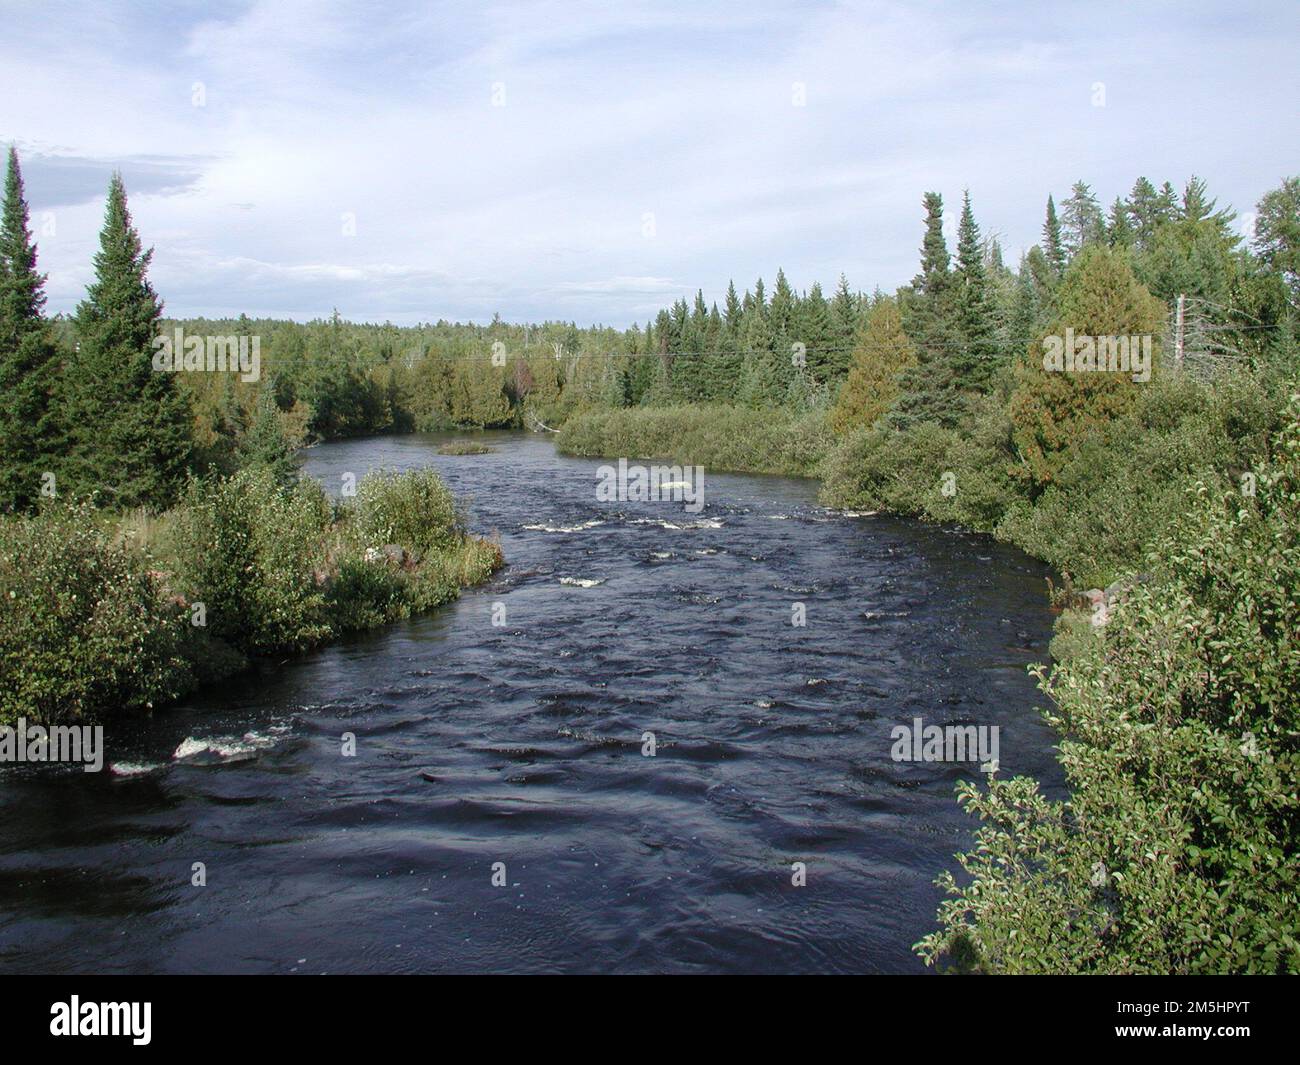 Gunflint Trail Scenic Byway - North Brule River. The North Brule River in high water flows between alder and spruce trees on its bank. A series of shallow rapids form ripples on the river. Minnesota (47.988° N 90.350° W) Stock Photo